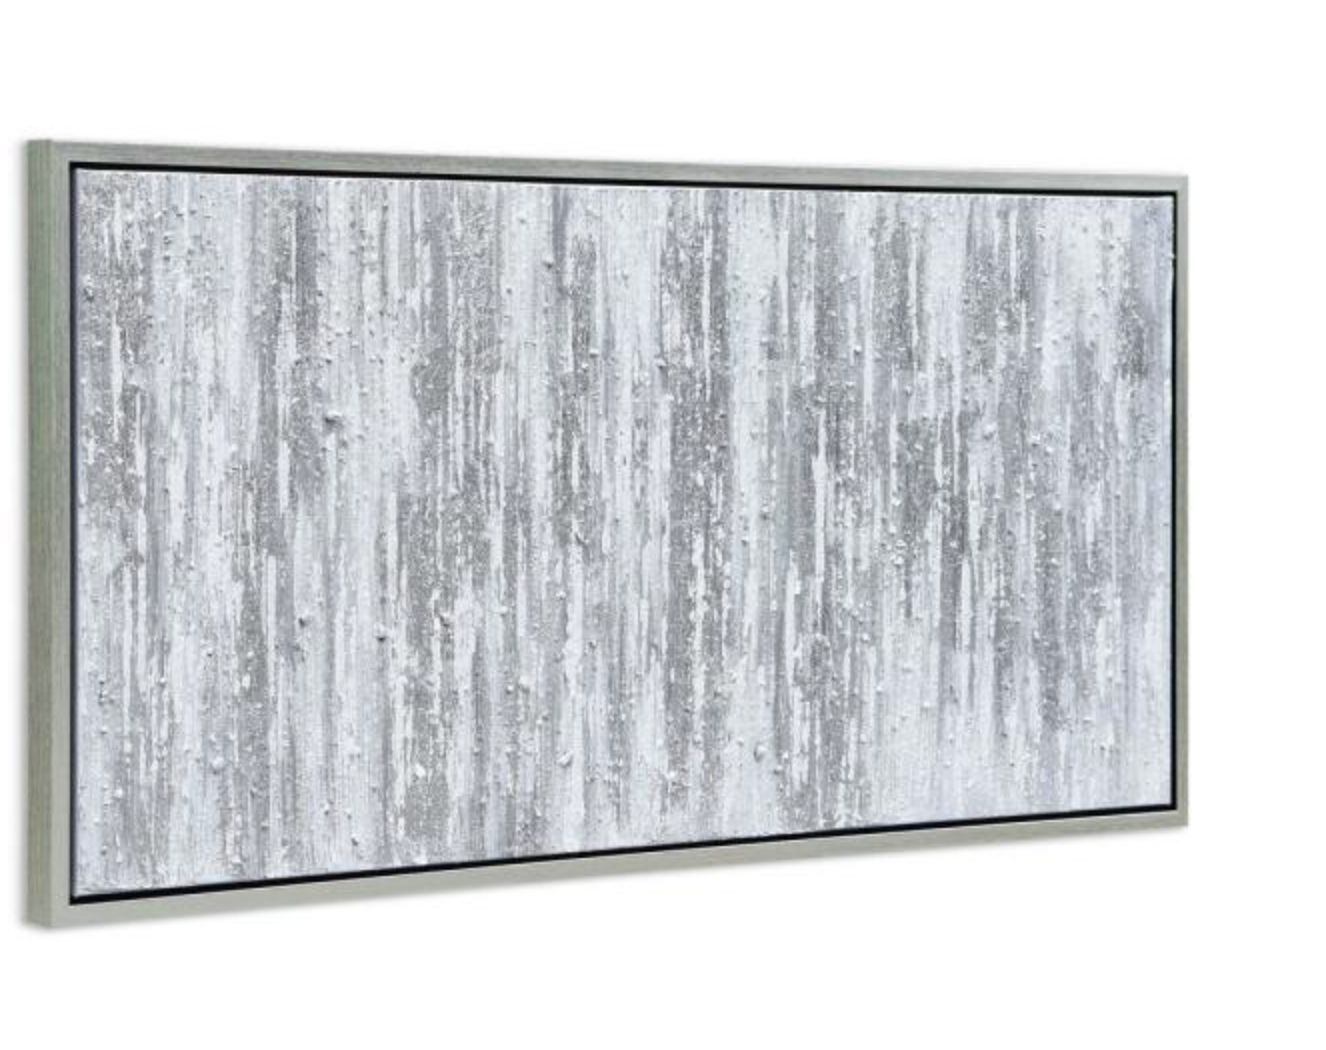 Alex Silver Textured Metallic Hand Painted Abstract Wall Art